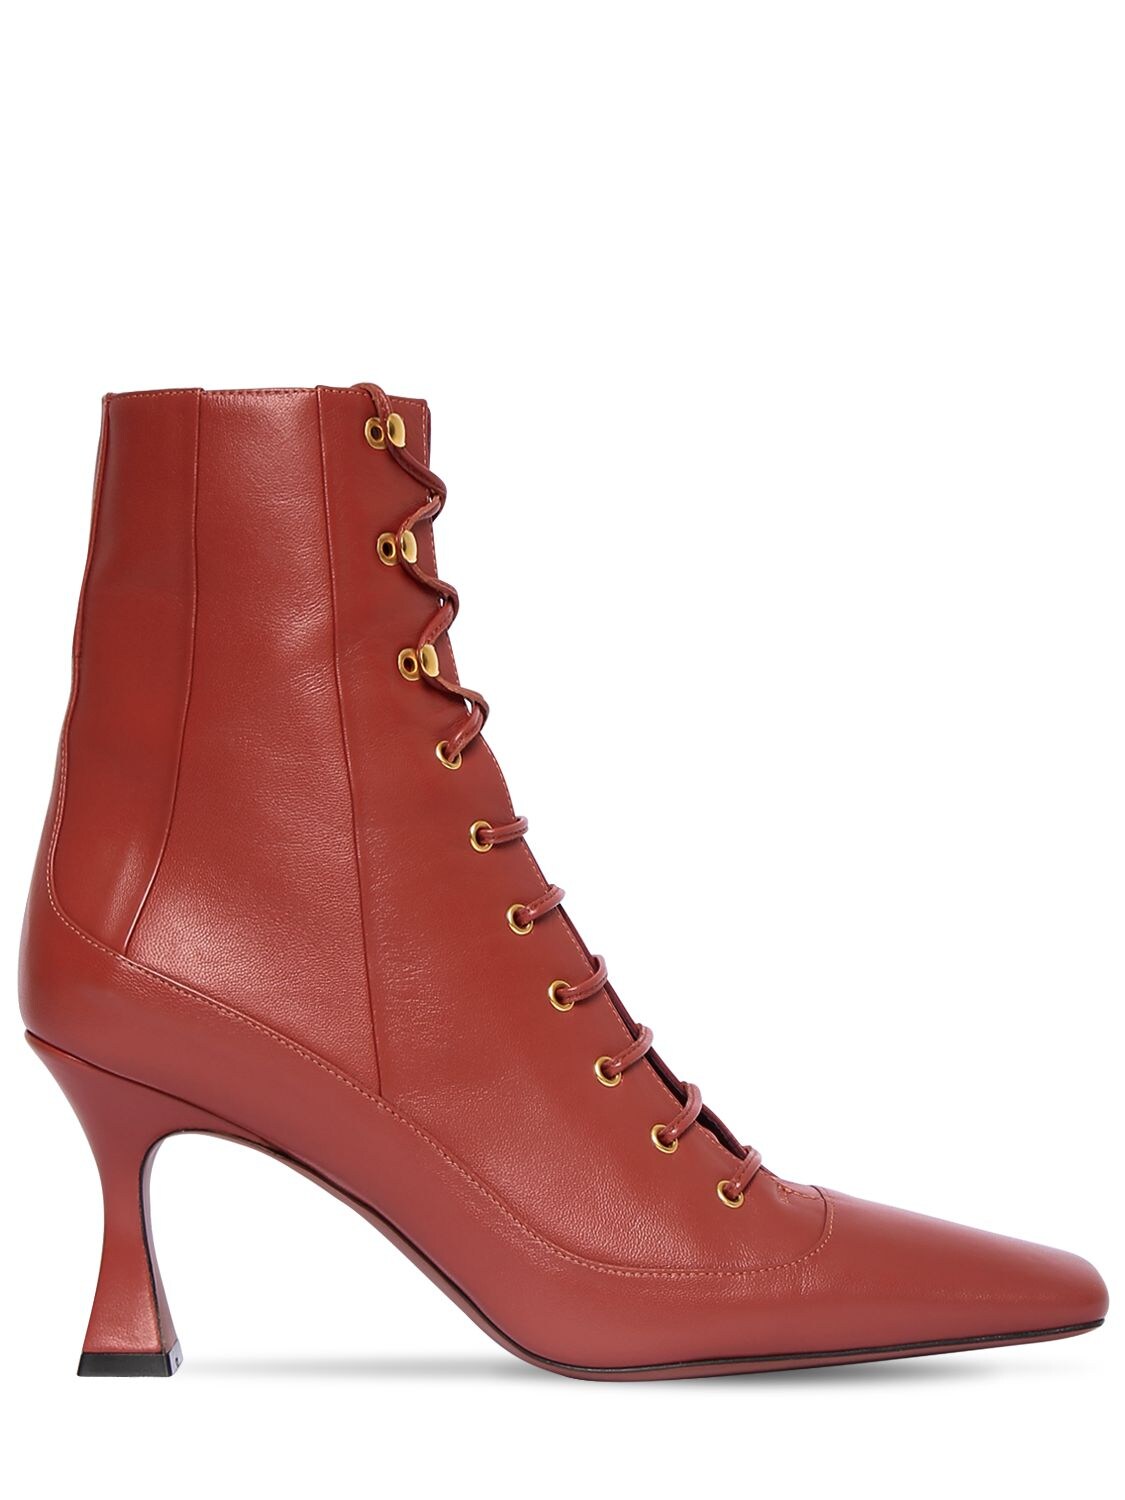 MANU ATELIER 80mm Lace-up Leather Ankle Boots